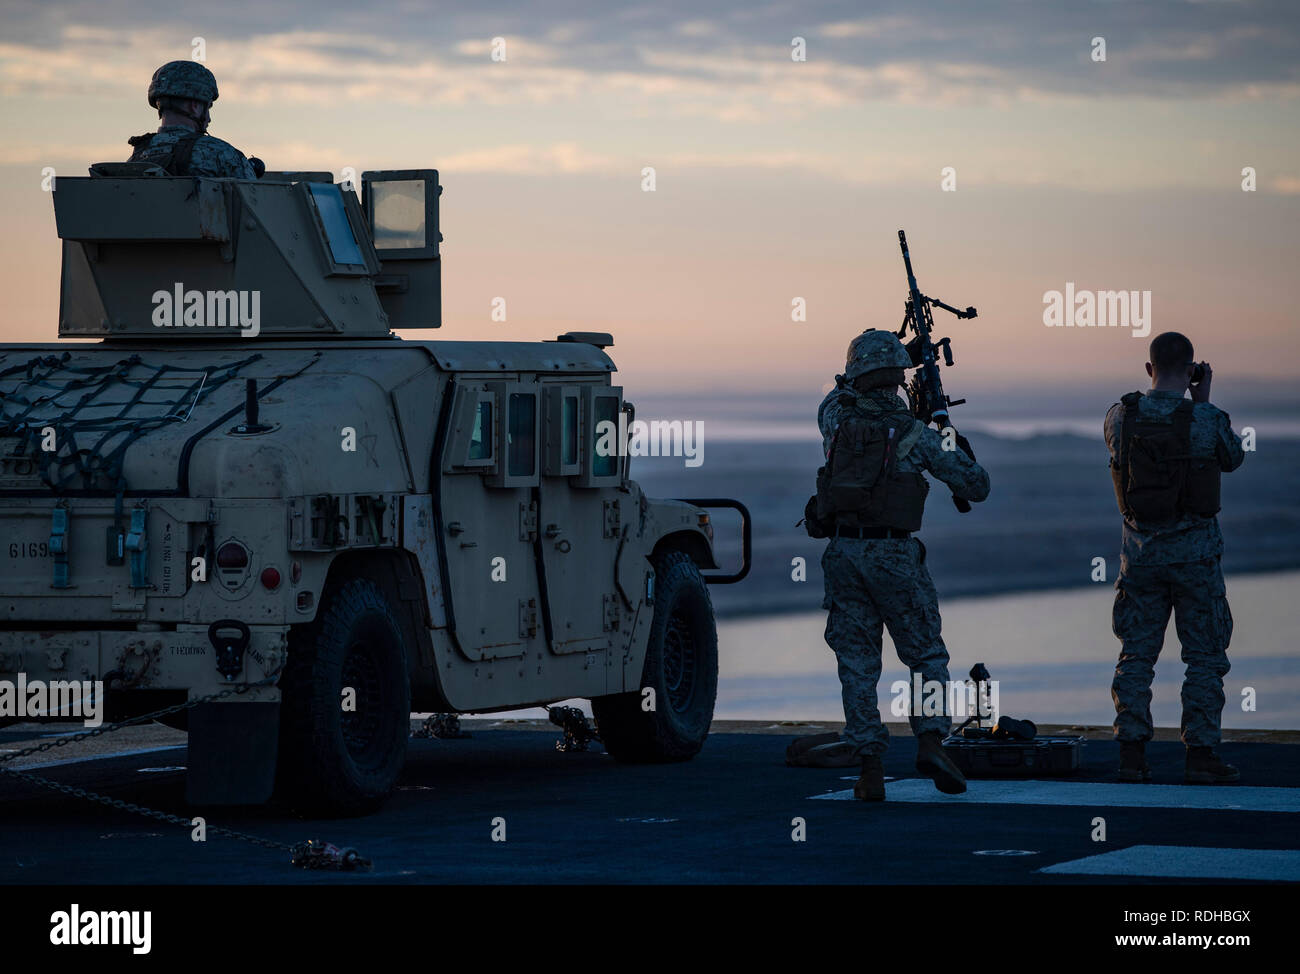 190112-N-UP035-0045 SUEZ CANAL (Jan. 12, 2019) - U.S. Marines attached to the 22nd Marine Expeditionary Unit stand watch aboard the Wasp-class amphibious assault ship USS Kearsarge (LHD 3) as it transits the Suez Canal, Jan. 12, 2019. Kearsarge is the flagship for the Kearsarge Amphibious Ready Group and, with the embarked 22nd Marine Expeditionary Unit, is deployed to the U.S. 5th Fleet area of operations in support of naval operations to ensure maritime stability and security in the Central region, connecting the Mediterranean and the Pacific through the western Indian Ocean and three strate Stock Photo